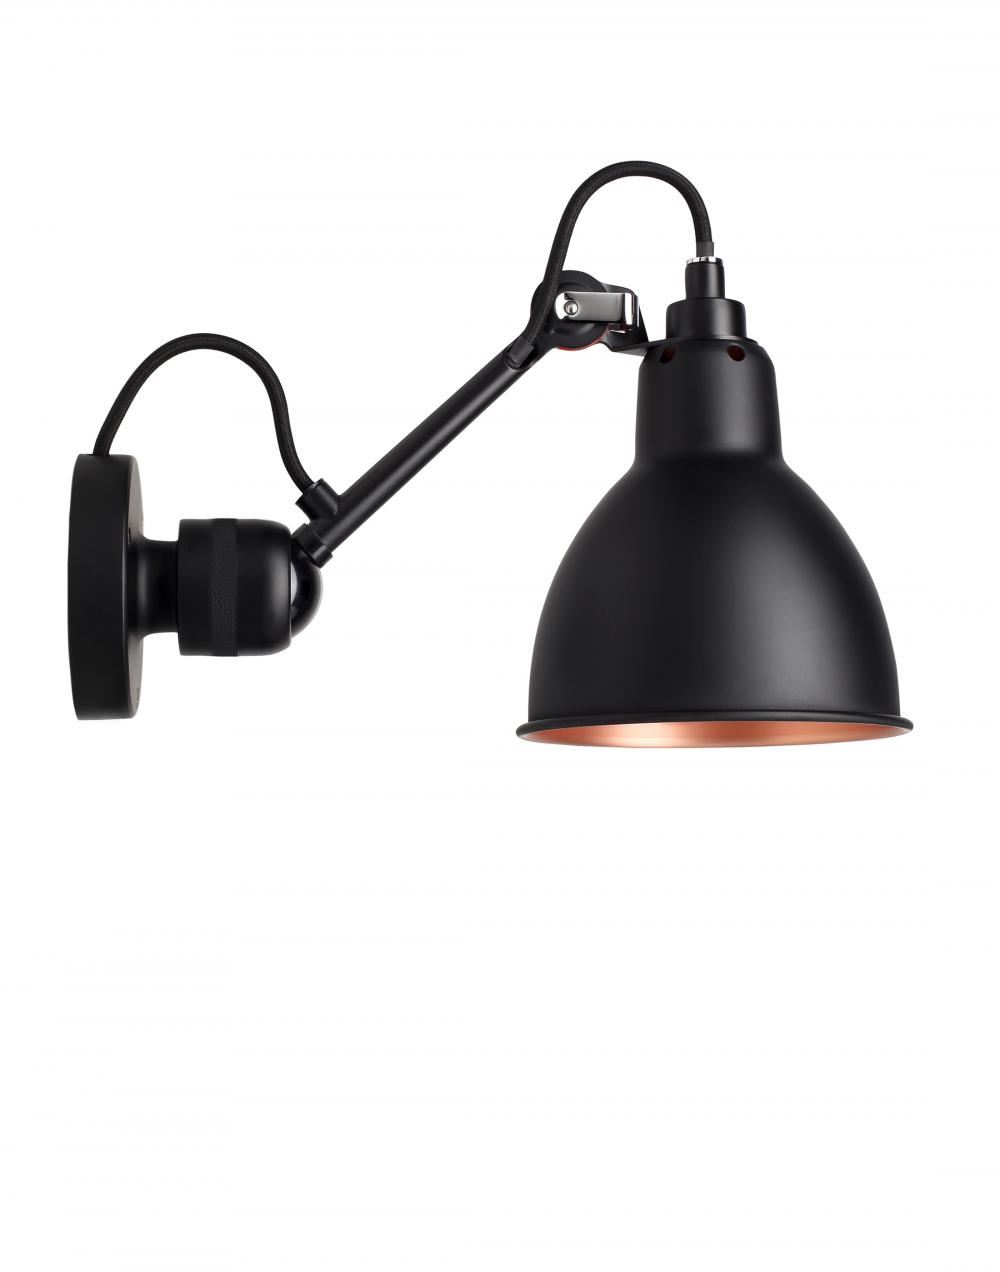 Lampe Gras 304 Small Wall Light Black Arm Black Shade With Copper Interior Round Hardwired